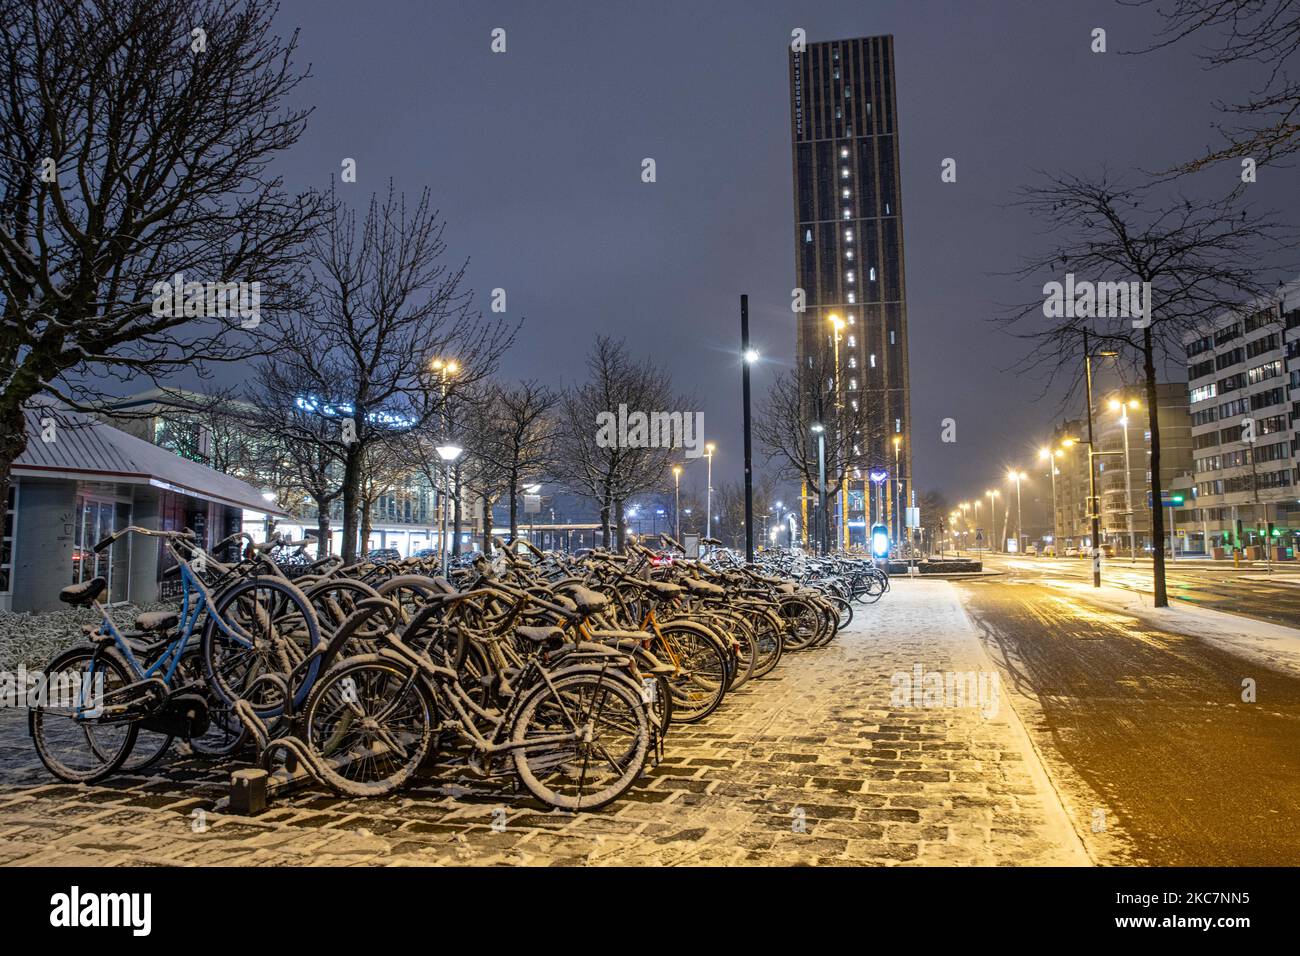 Thousands of bicycles covered by snow as seen parked near the train station. Night long exposure photography images of snow-covered and illuminated with city lights Eindhoven city center after the snowfall. Daily life in the Netherlands with the first snowfall of the year covering almost everything the cold weather shows subzero temperature. The chilly condition with snow and ice changed soon according to the forecast, the freezing condition will not last more than a day. Eindhoven, the Netherlands on January 16, 2020 (Photo by Nicolas Economou/NurPhoto) Stock Photo